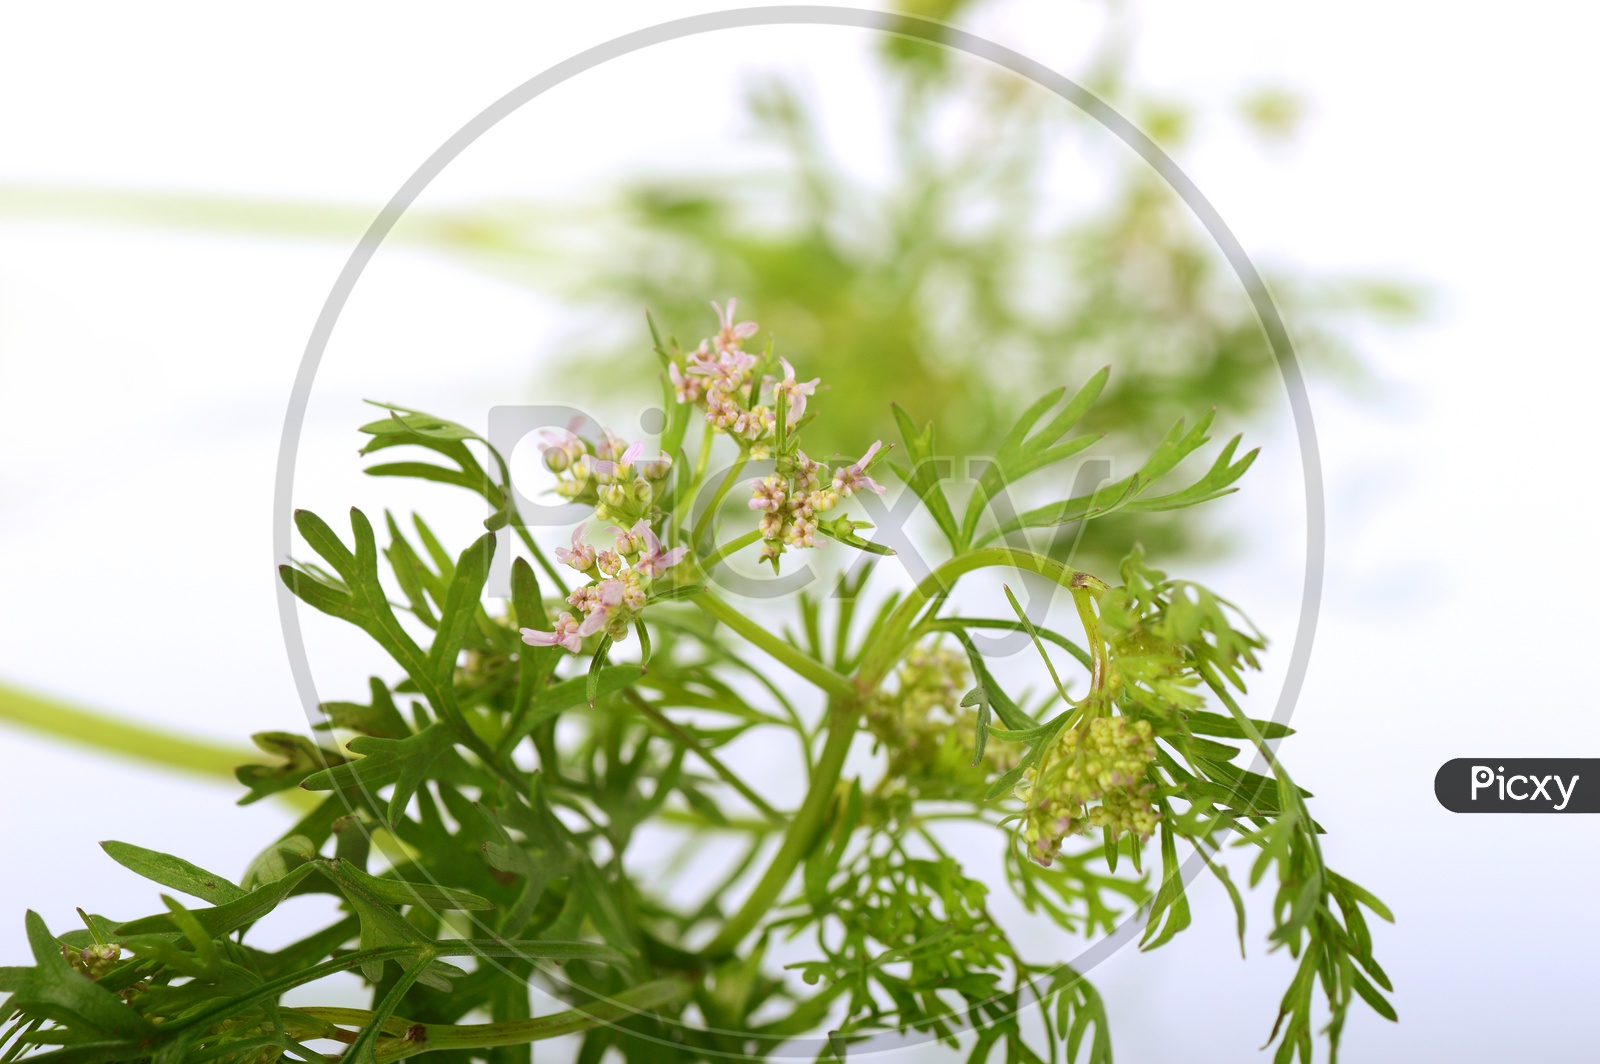 Fresh Coriander Leaves With Flowers On an Isolated White Background